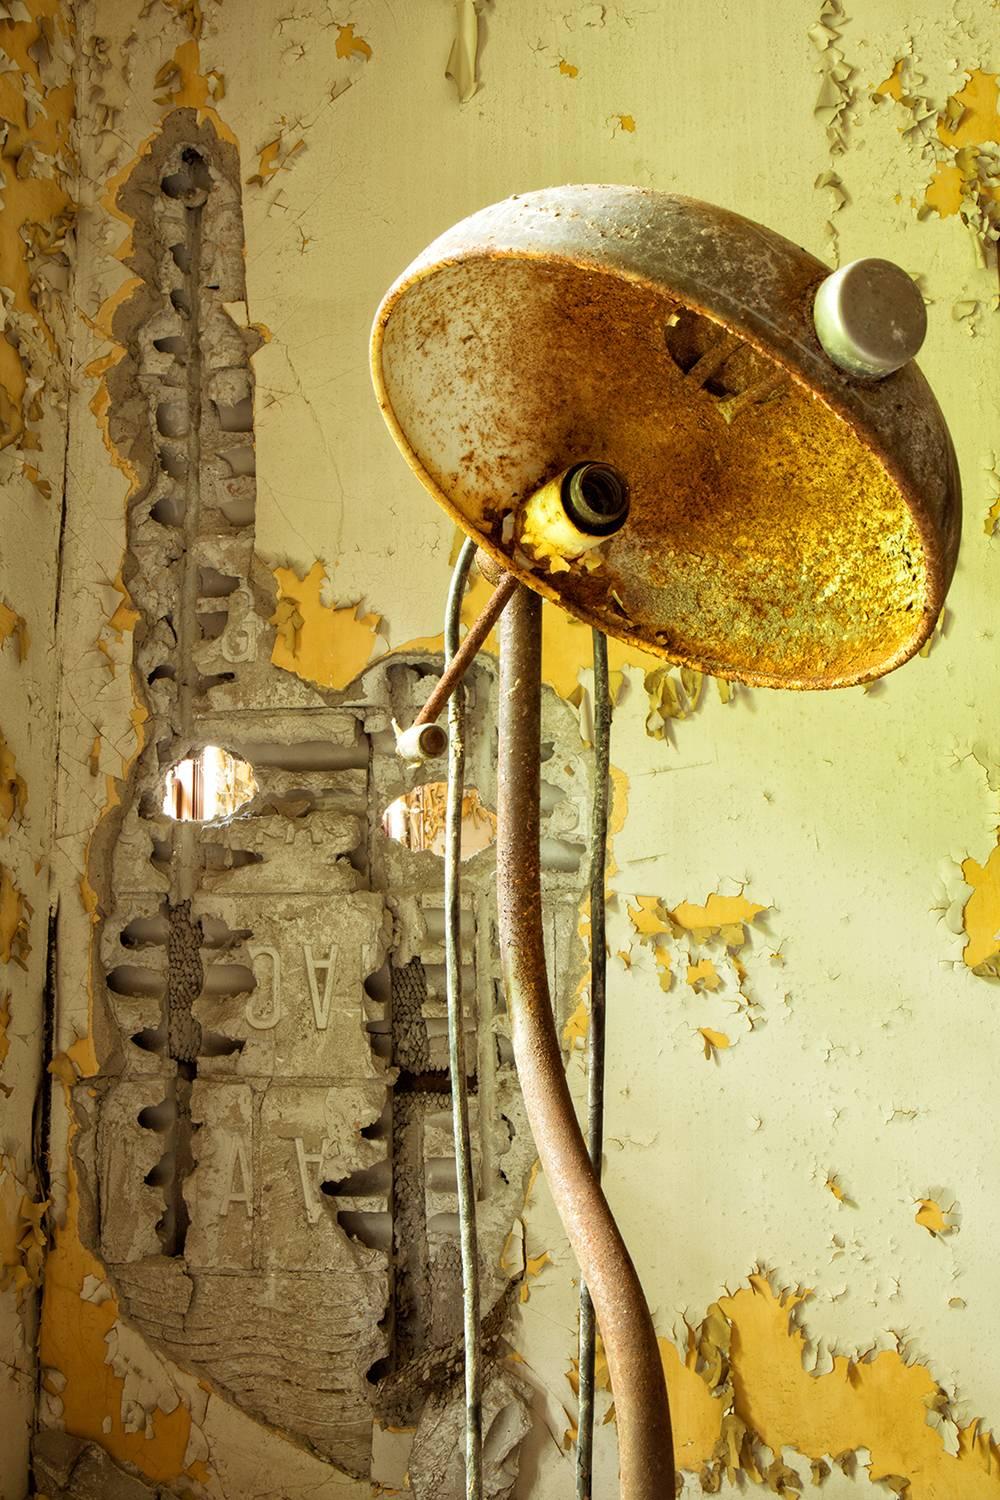 Rebecca Skinner Color Photograph - "Aged", contemporary, abandoned, yellow, lamp, vintage, color photo, metal print